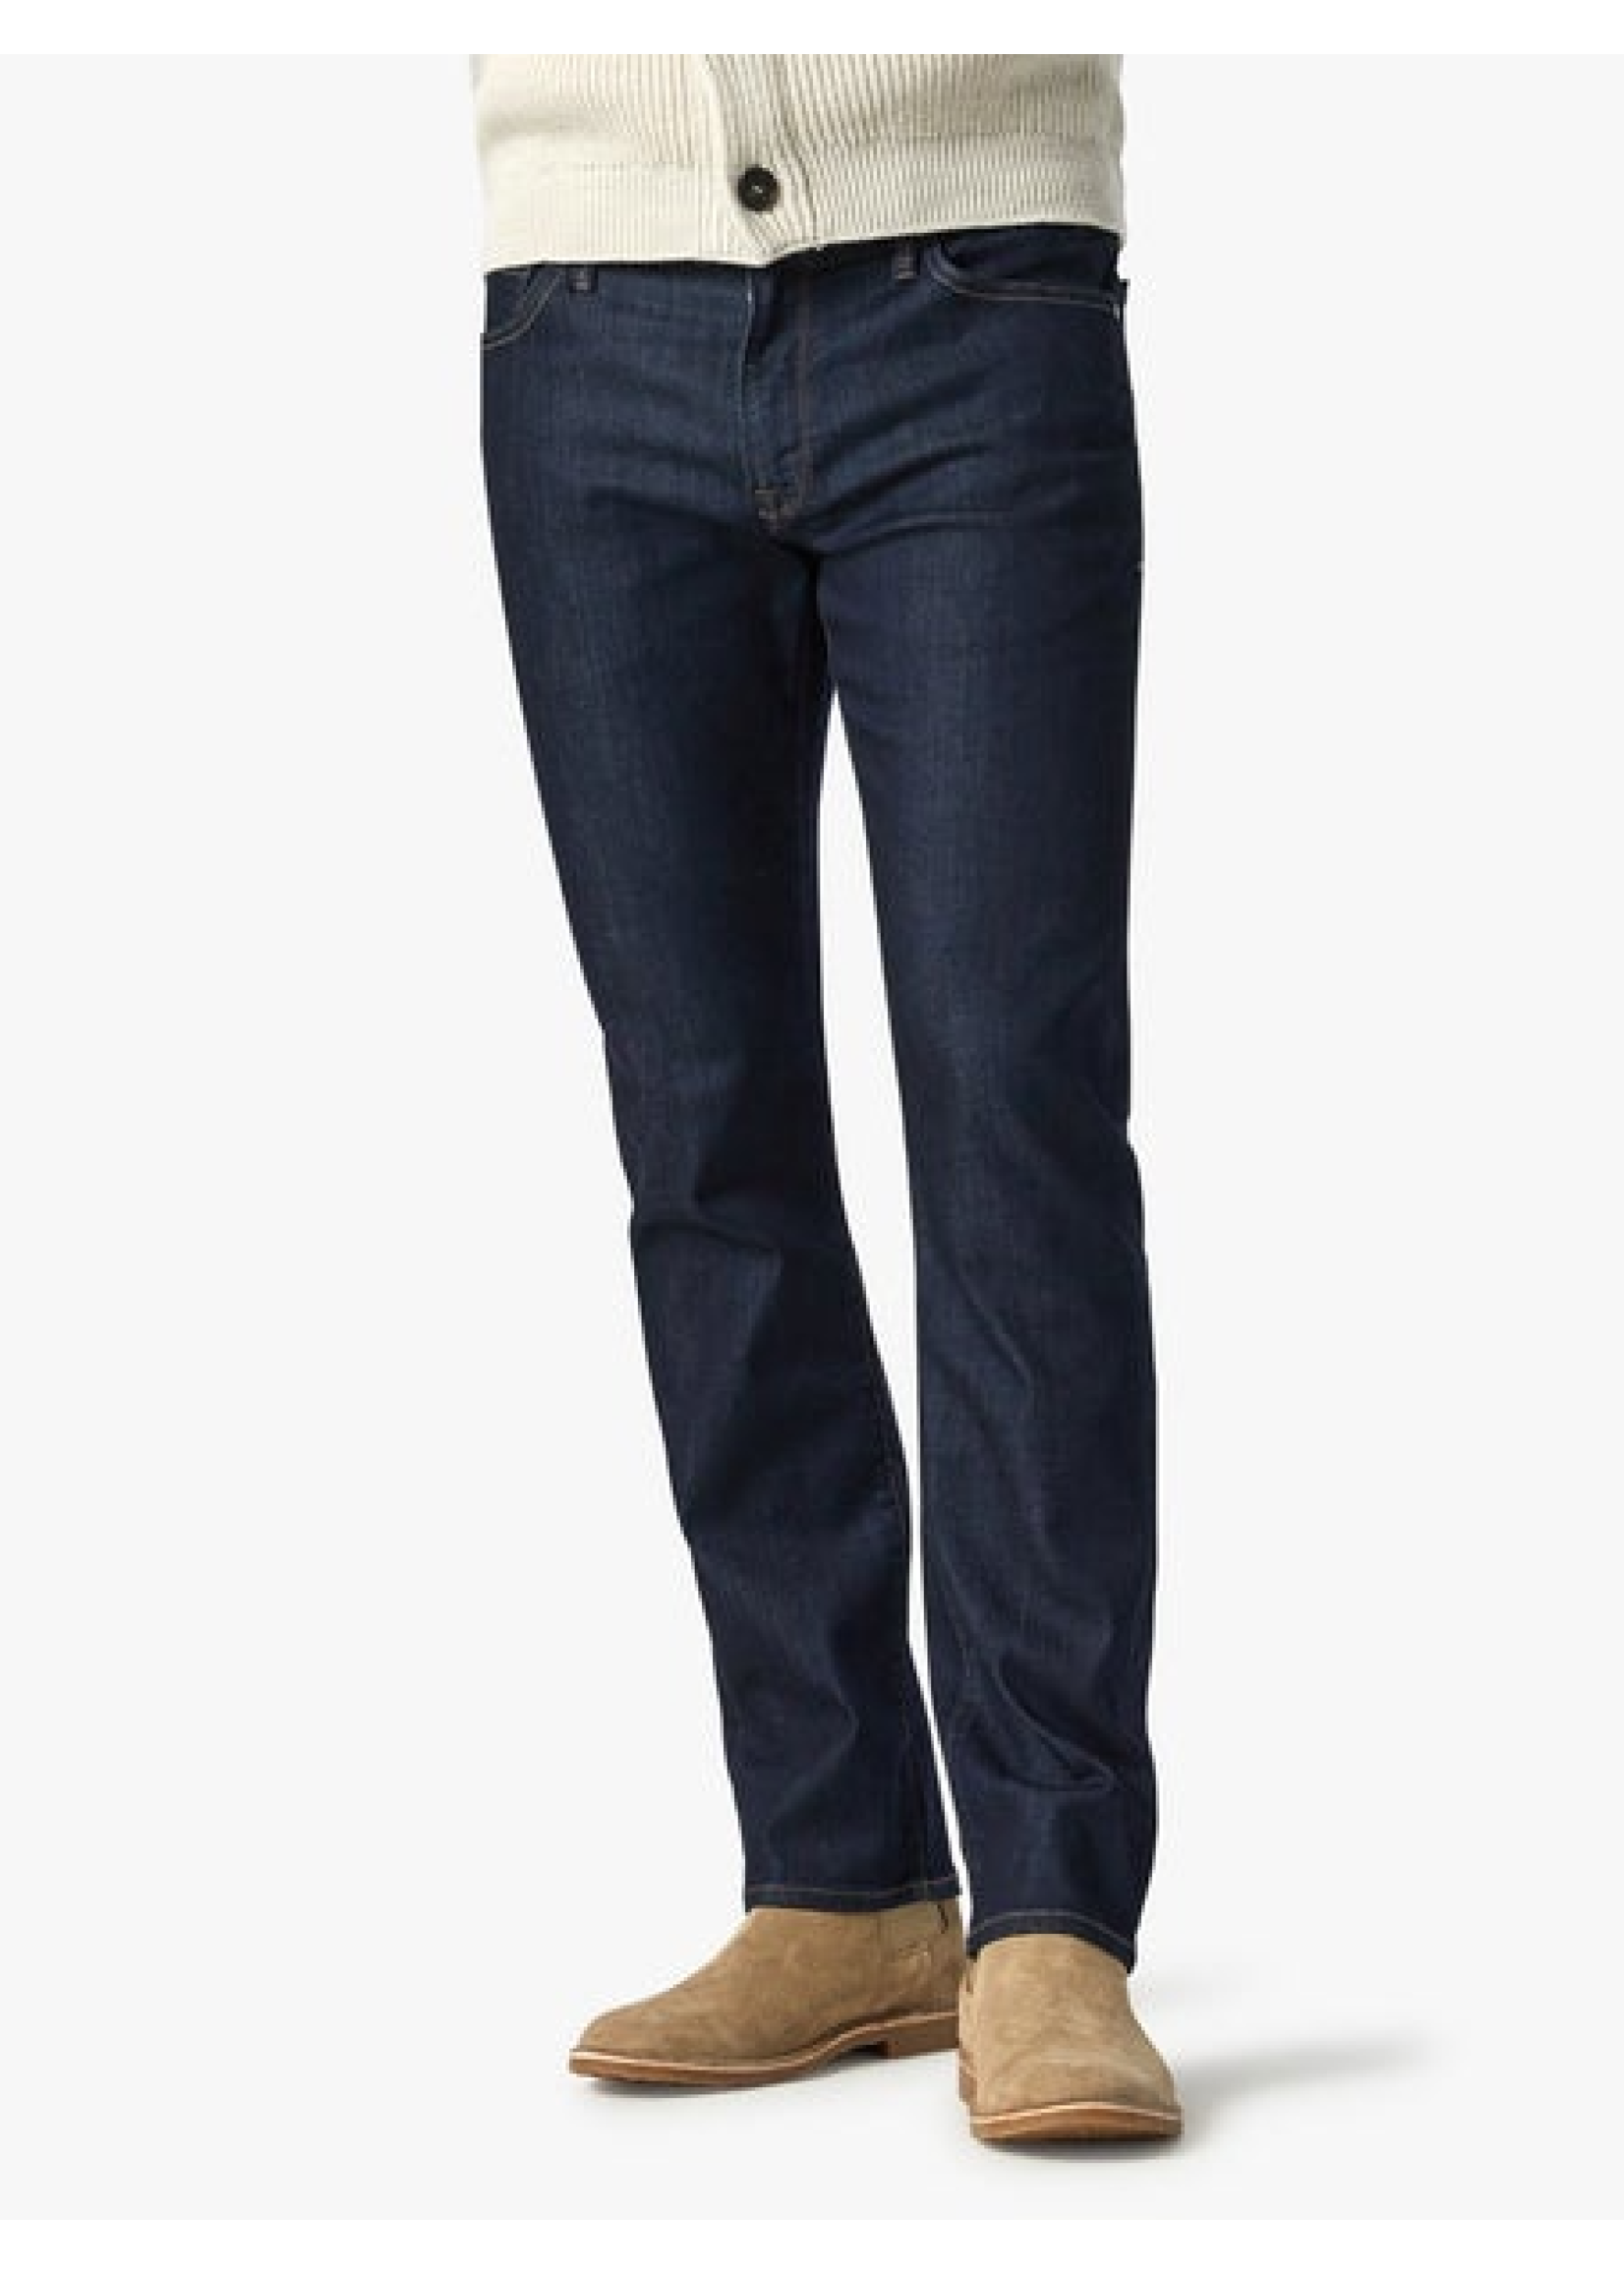 34 HERITAGE 'Courage' Straight Leg Jean in Rinse Vintage